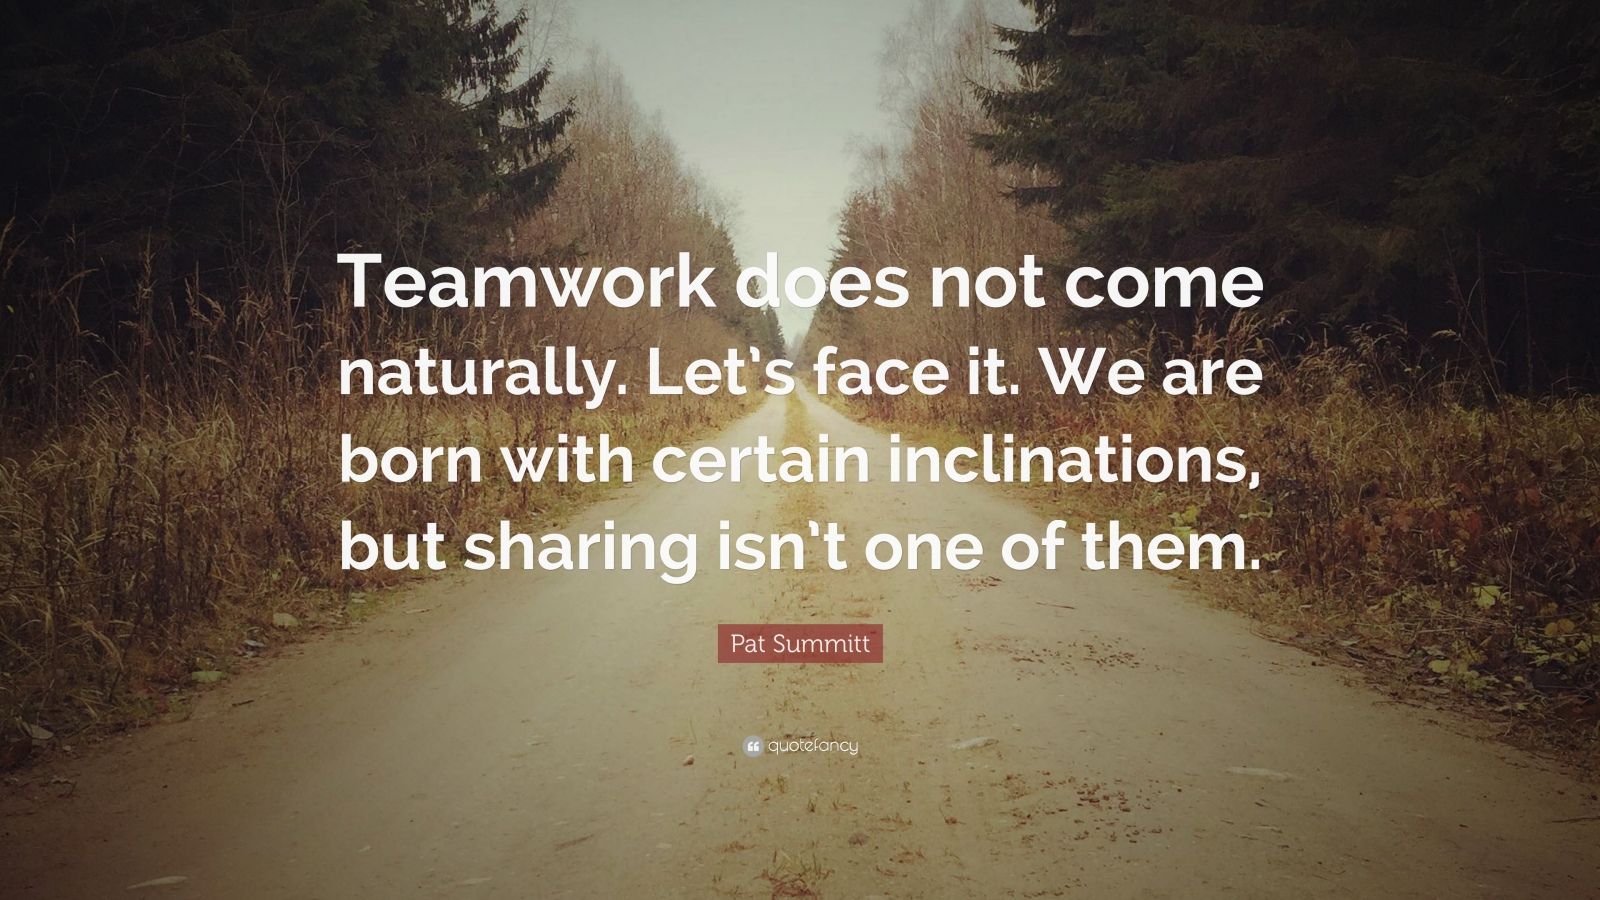 Pat Summitt Quote: “Teamwork does not come naturally. Let’s face it. We ...